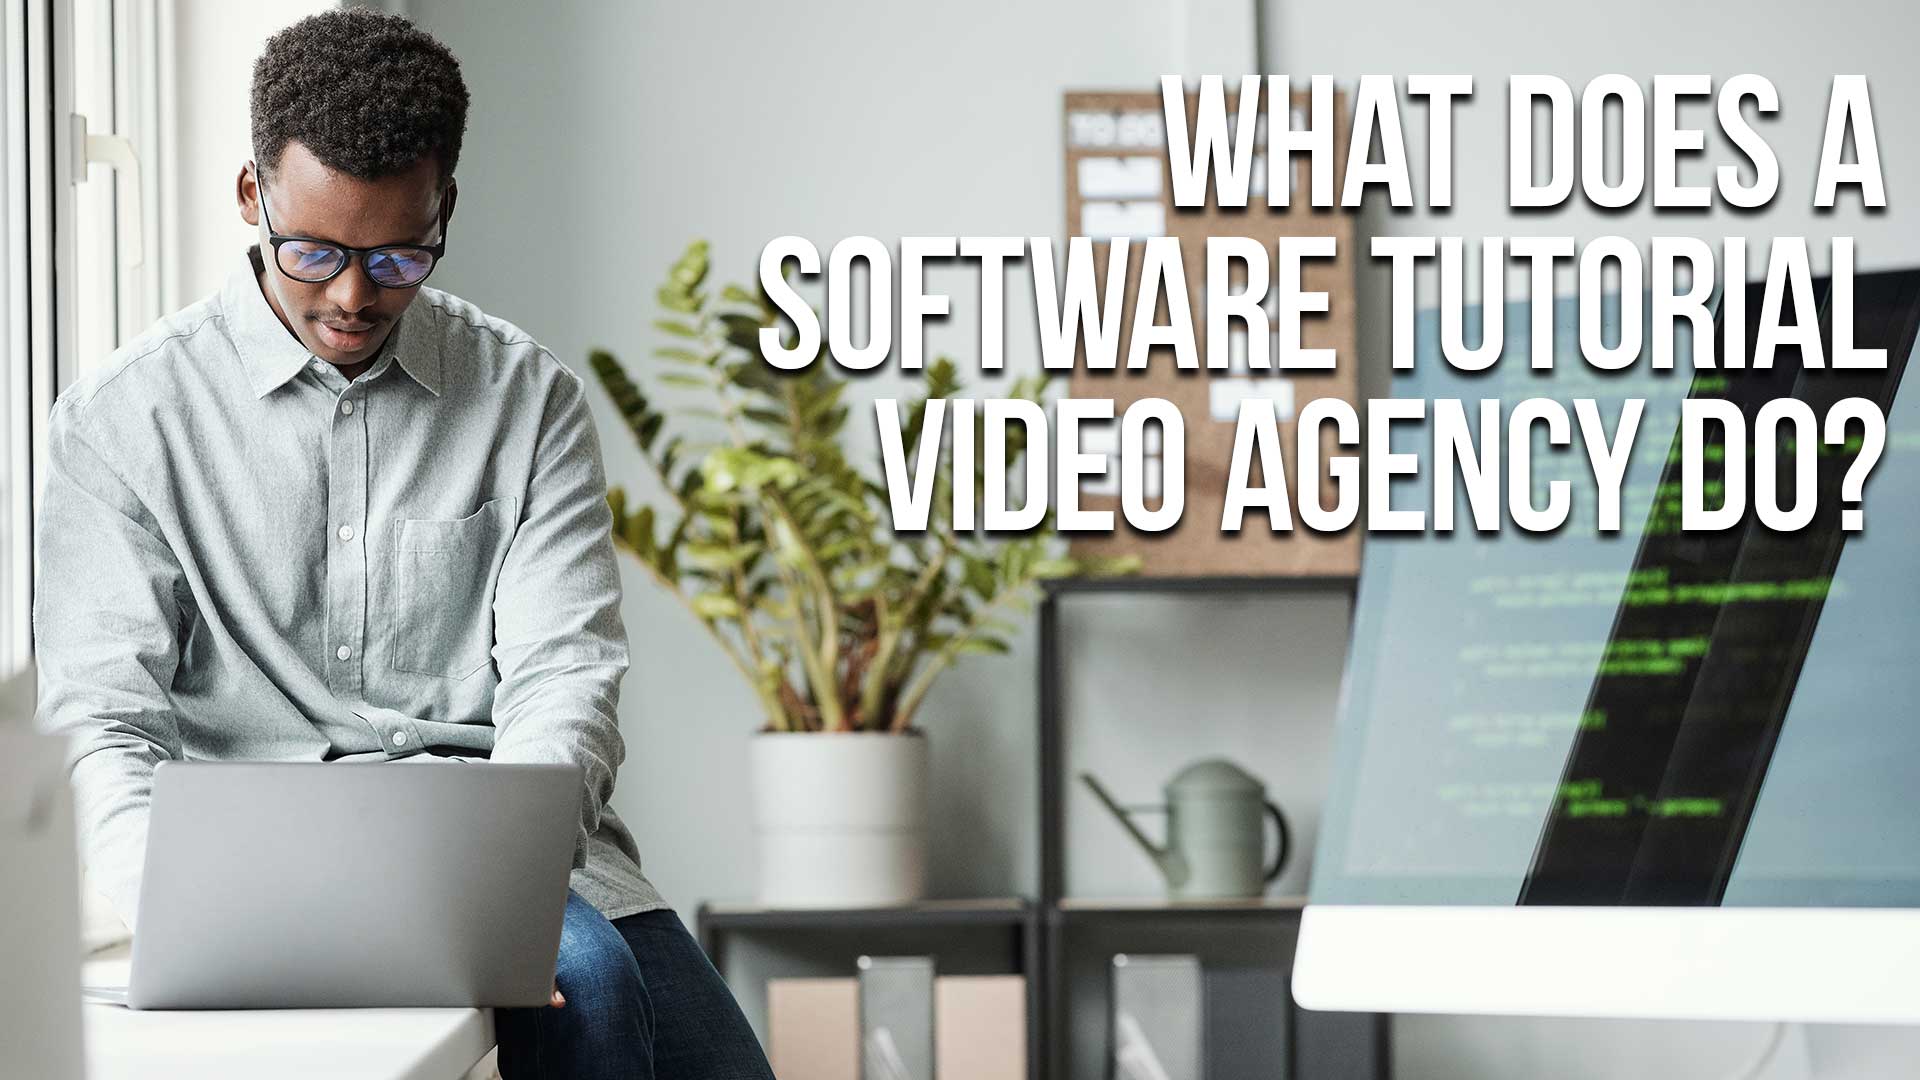 What Does a Software Tutorial Video Agency Do?